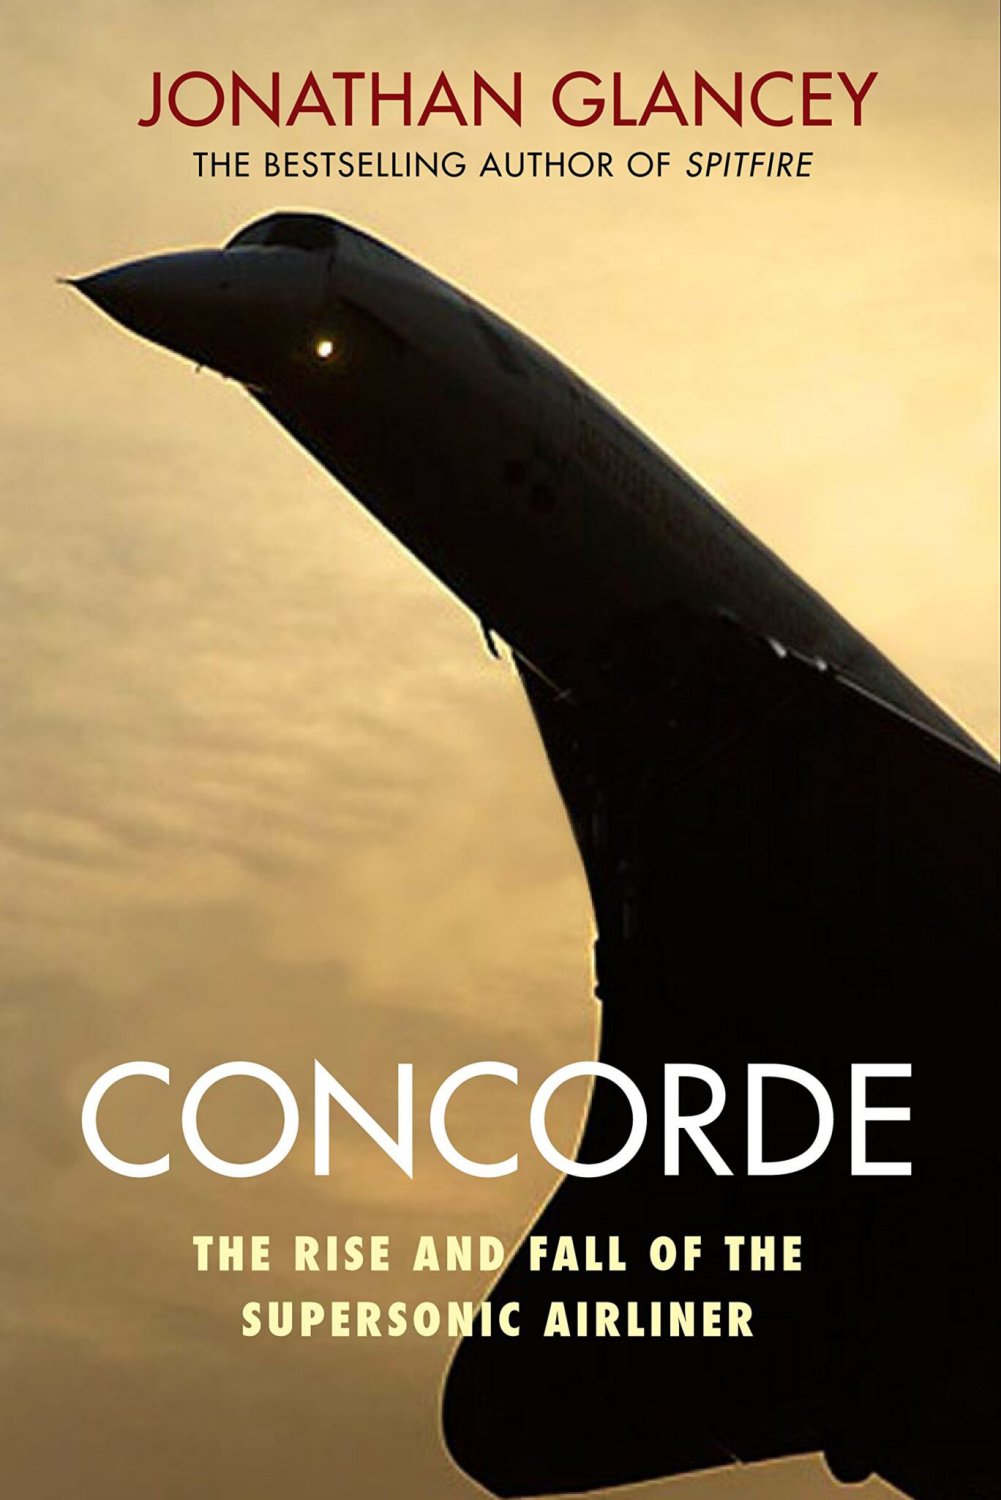 Concorde, By Jonathan Glancey - Eaton Family Website